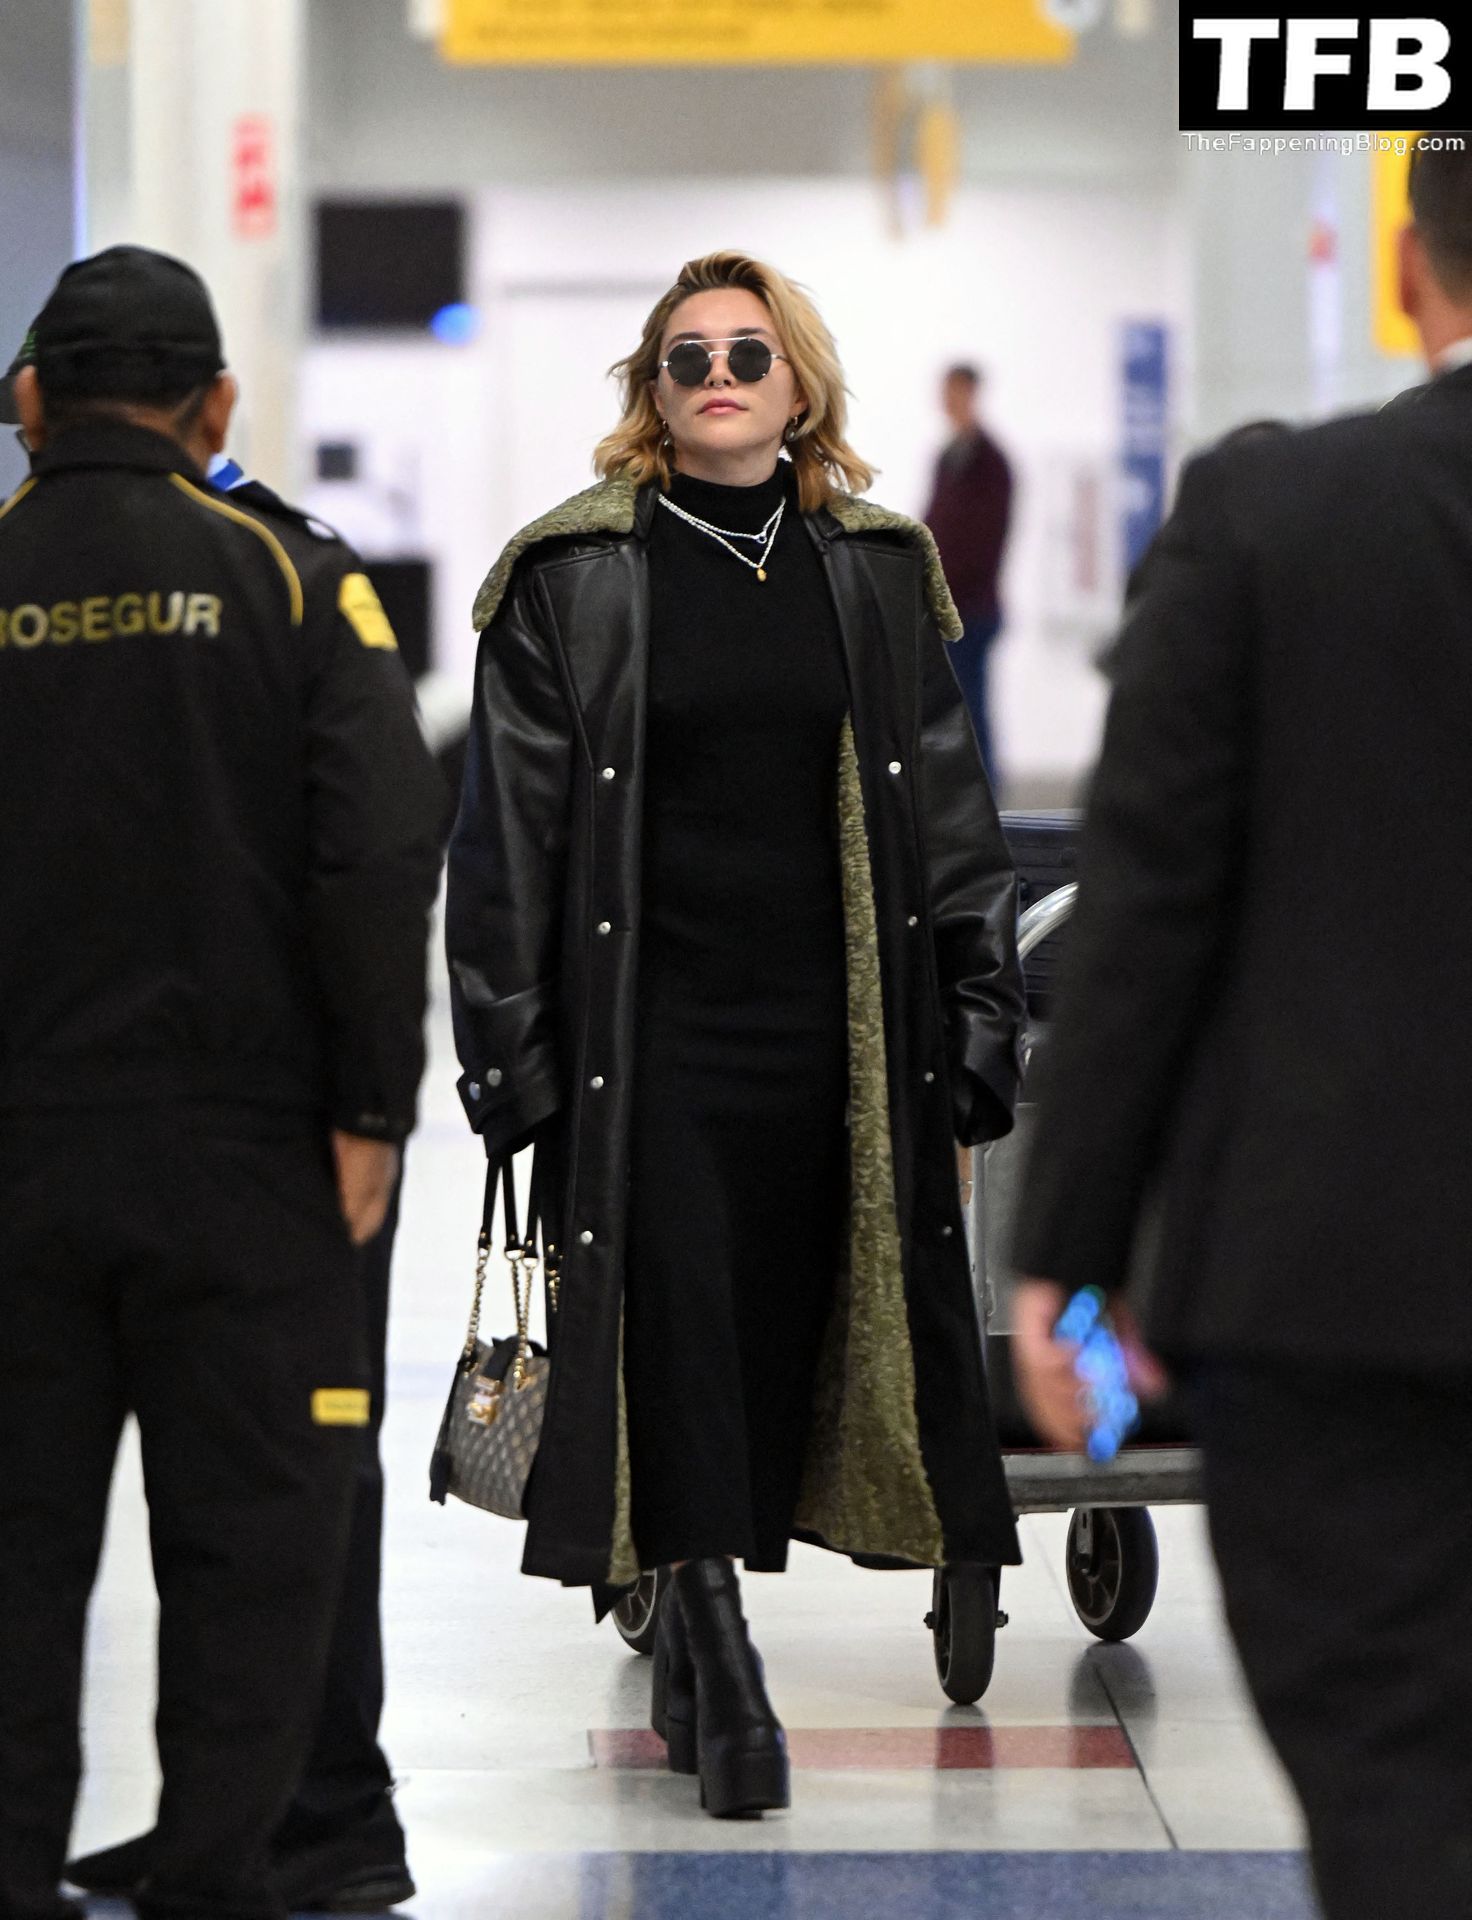 Florence Pugh Pokies The Fappening Blog 19 - Florence Pugh Shows Off Her Pokies at JFK airport in NYC (31 Photos)